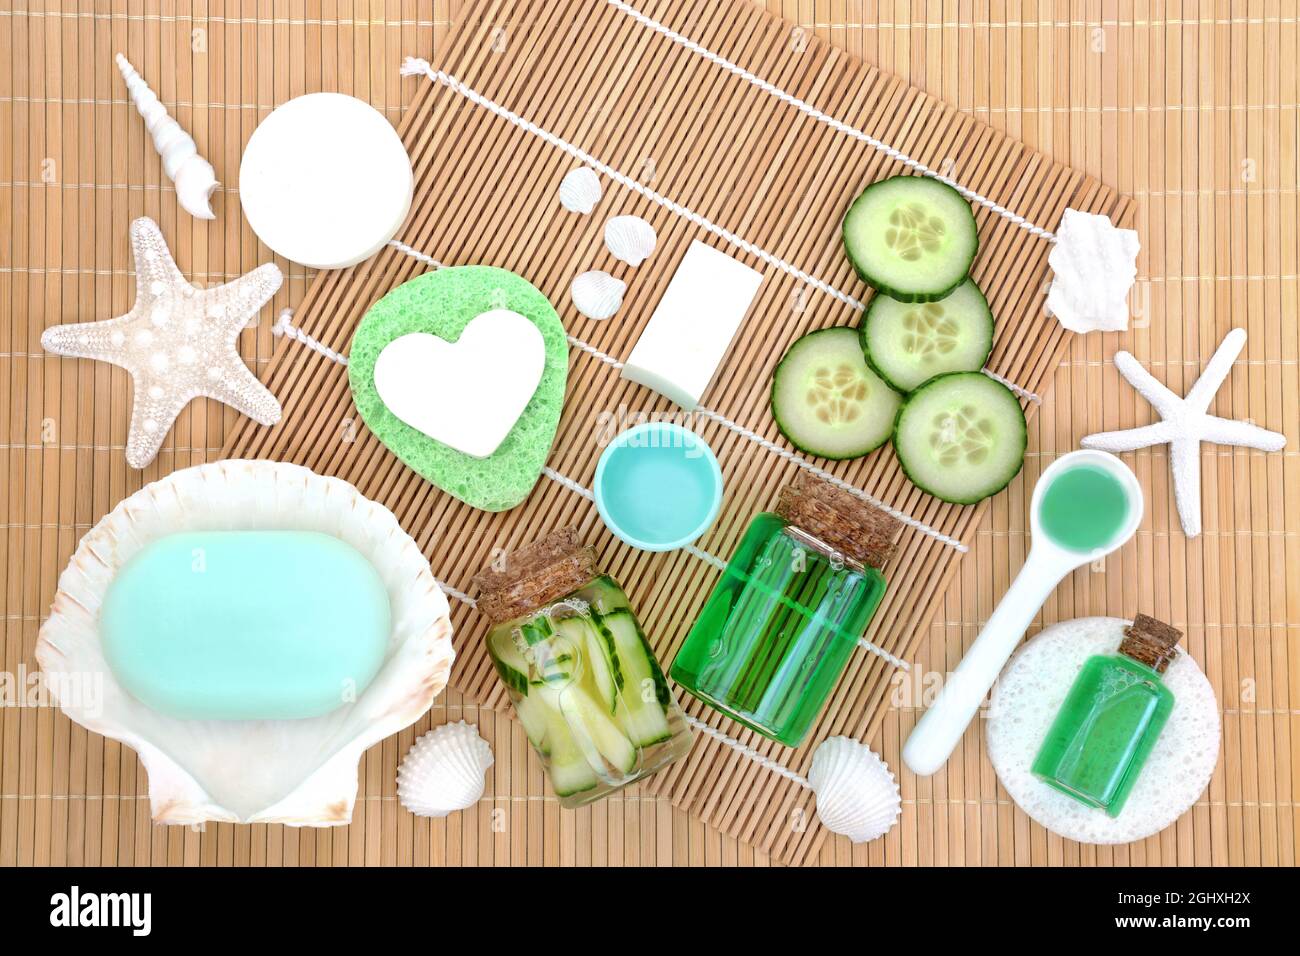 Anti ageing anti wrinkle cucumber cosmetic beauty treatment concept with fresh slices, soap, gel and sponges. On bamboo background. Stock Photo